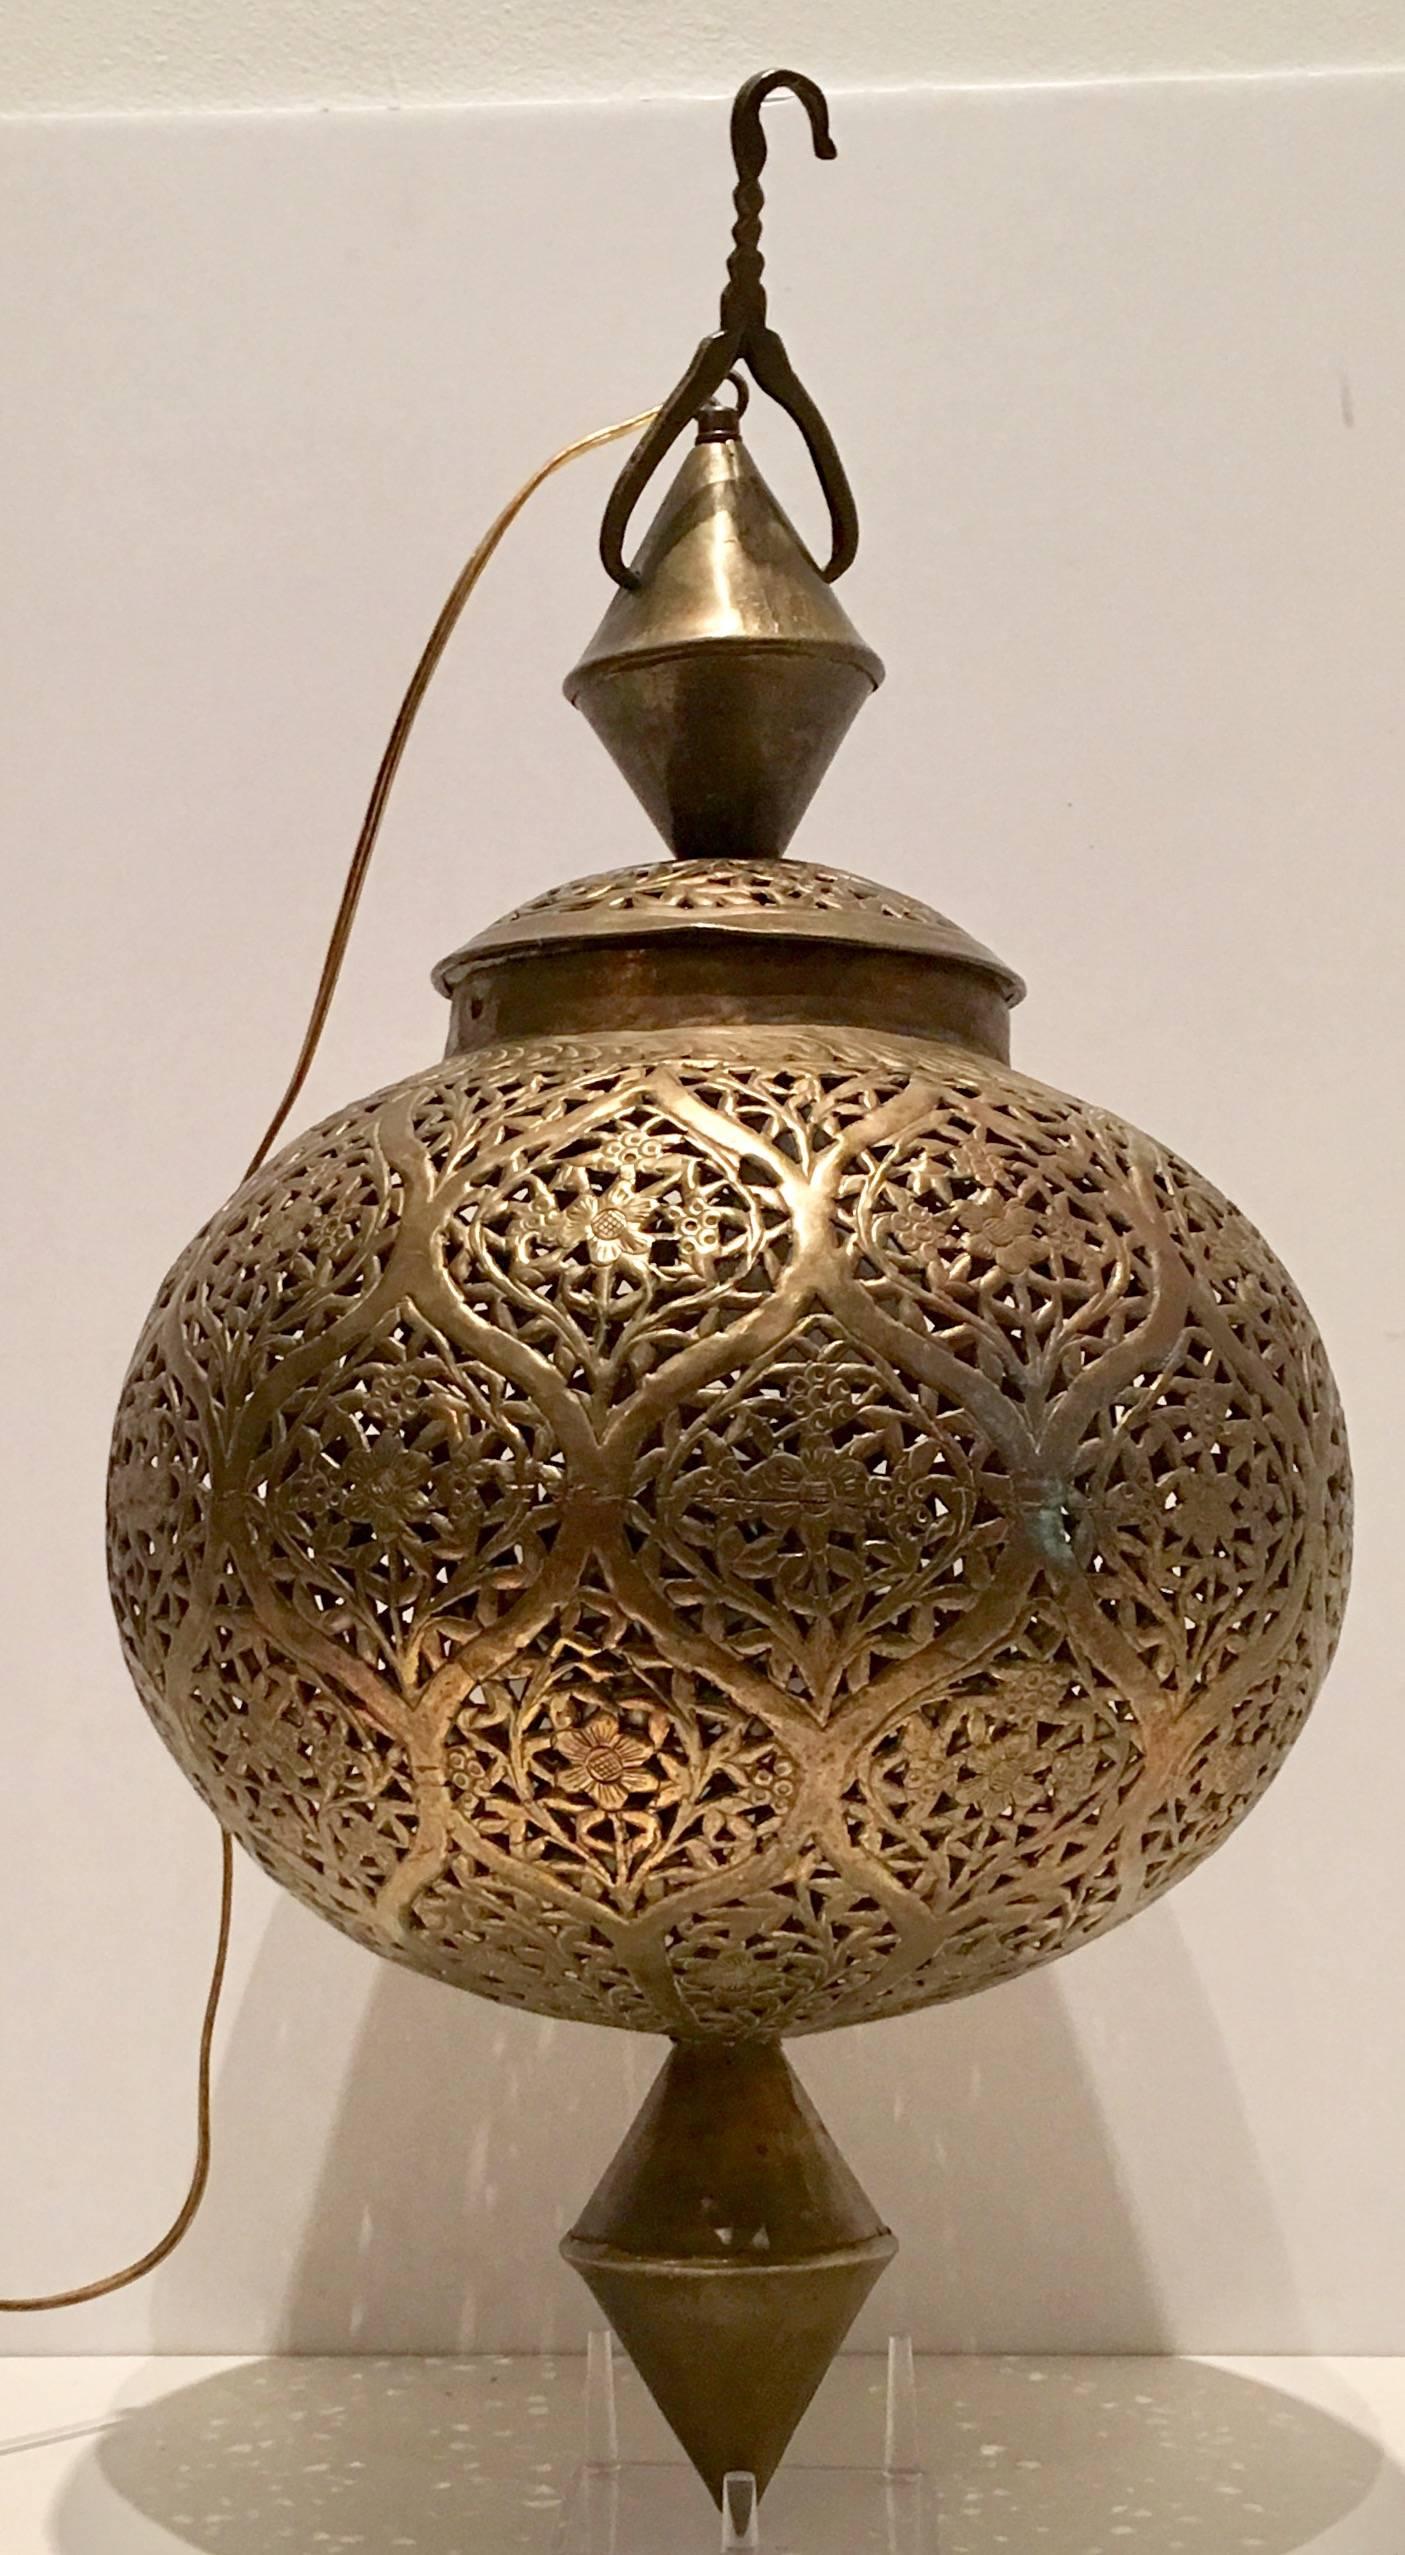 This Moroccan brass light fixture is delicately handcrafted and chiselled with fine filigree Art Nouveau floral design by skilled Moroccan artisans. Very interesting hanger style hook design at top. Includes approximately 120" newer brass chain